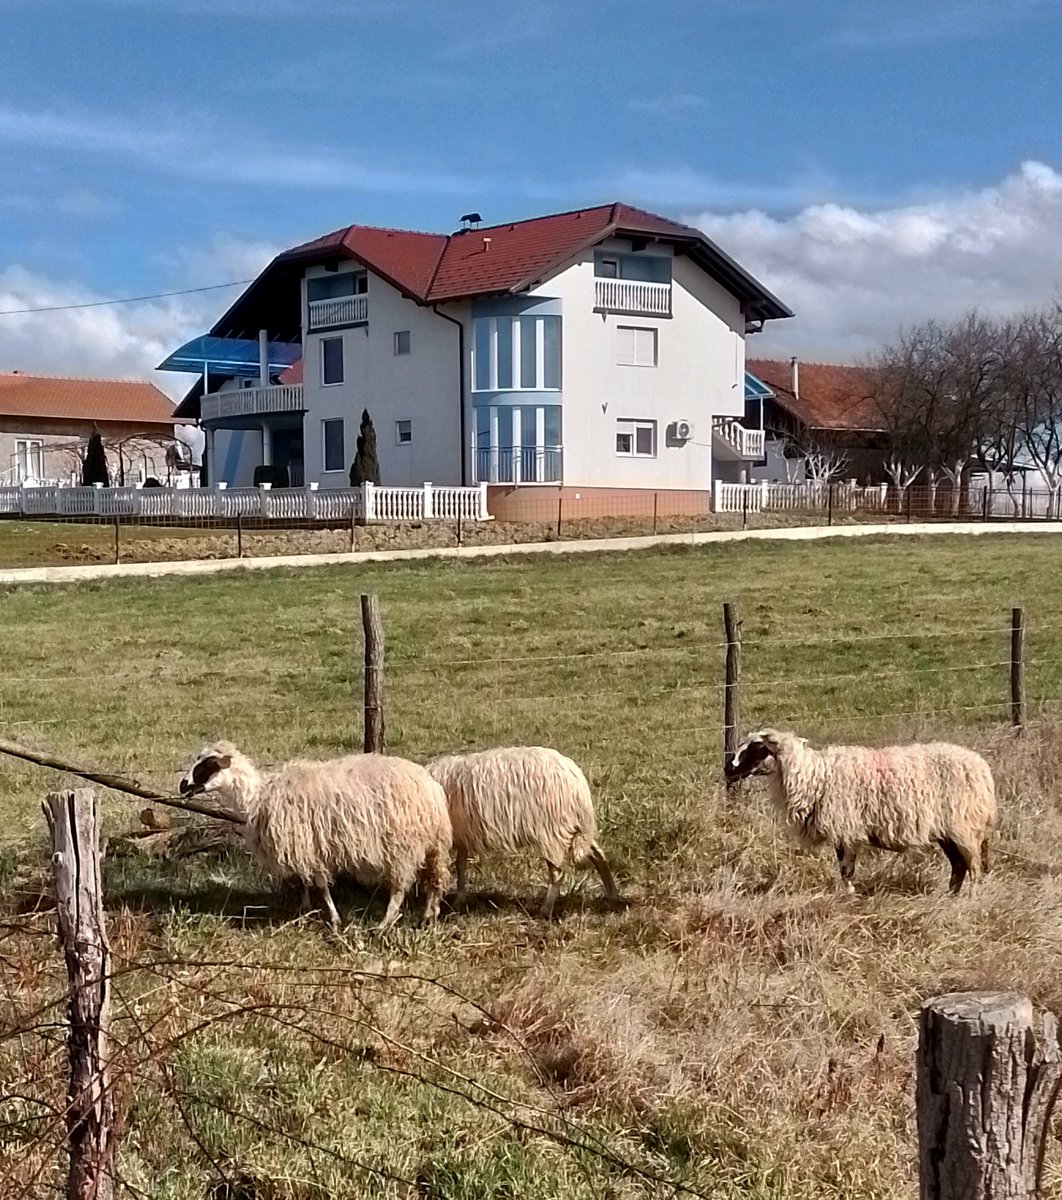 Unexpected guests #mobilephotos #landscapephoto #sheeps